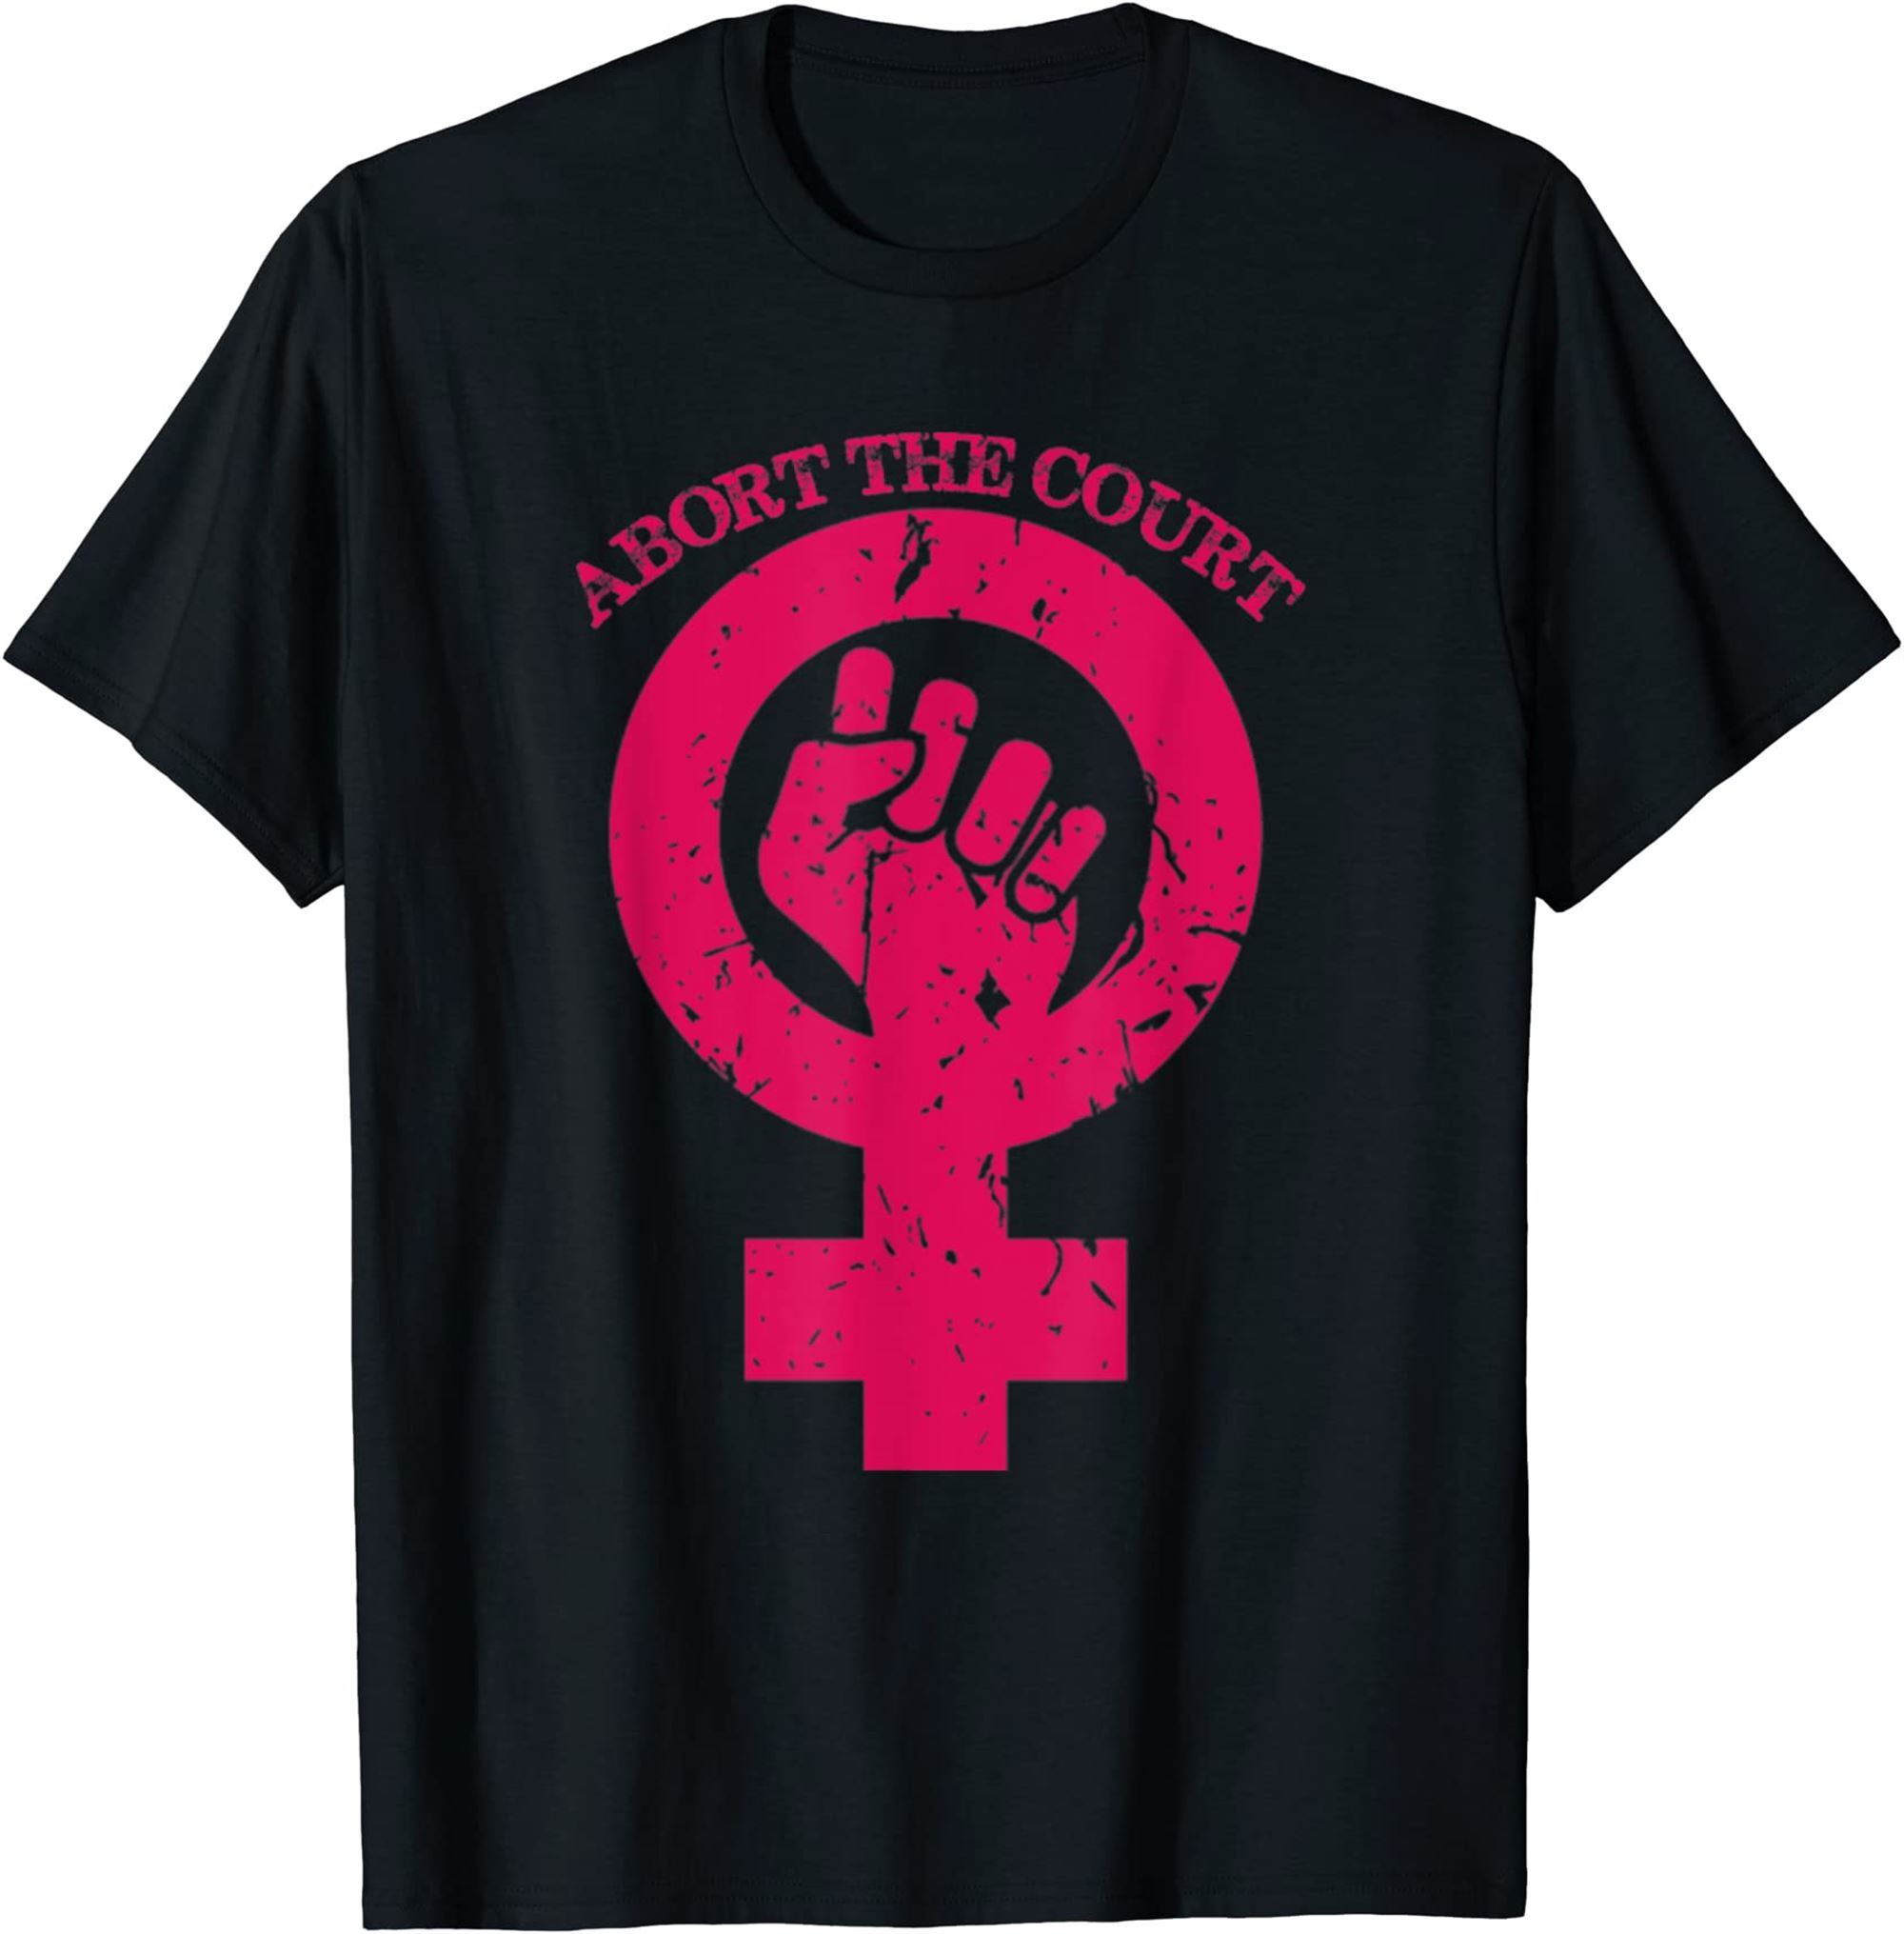 Abort The Court Womens Reproductive Rights T Shirt Plus Size Up To 5xl